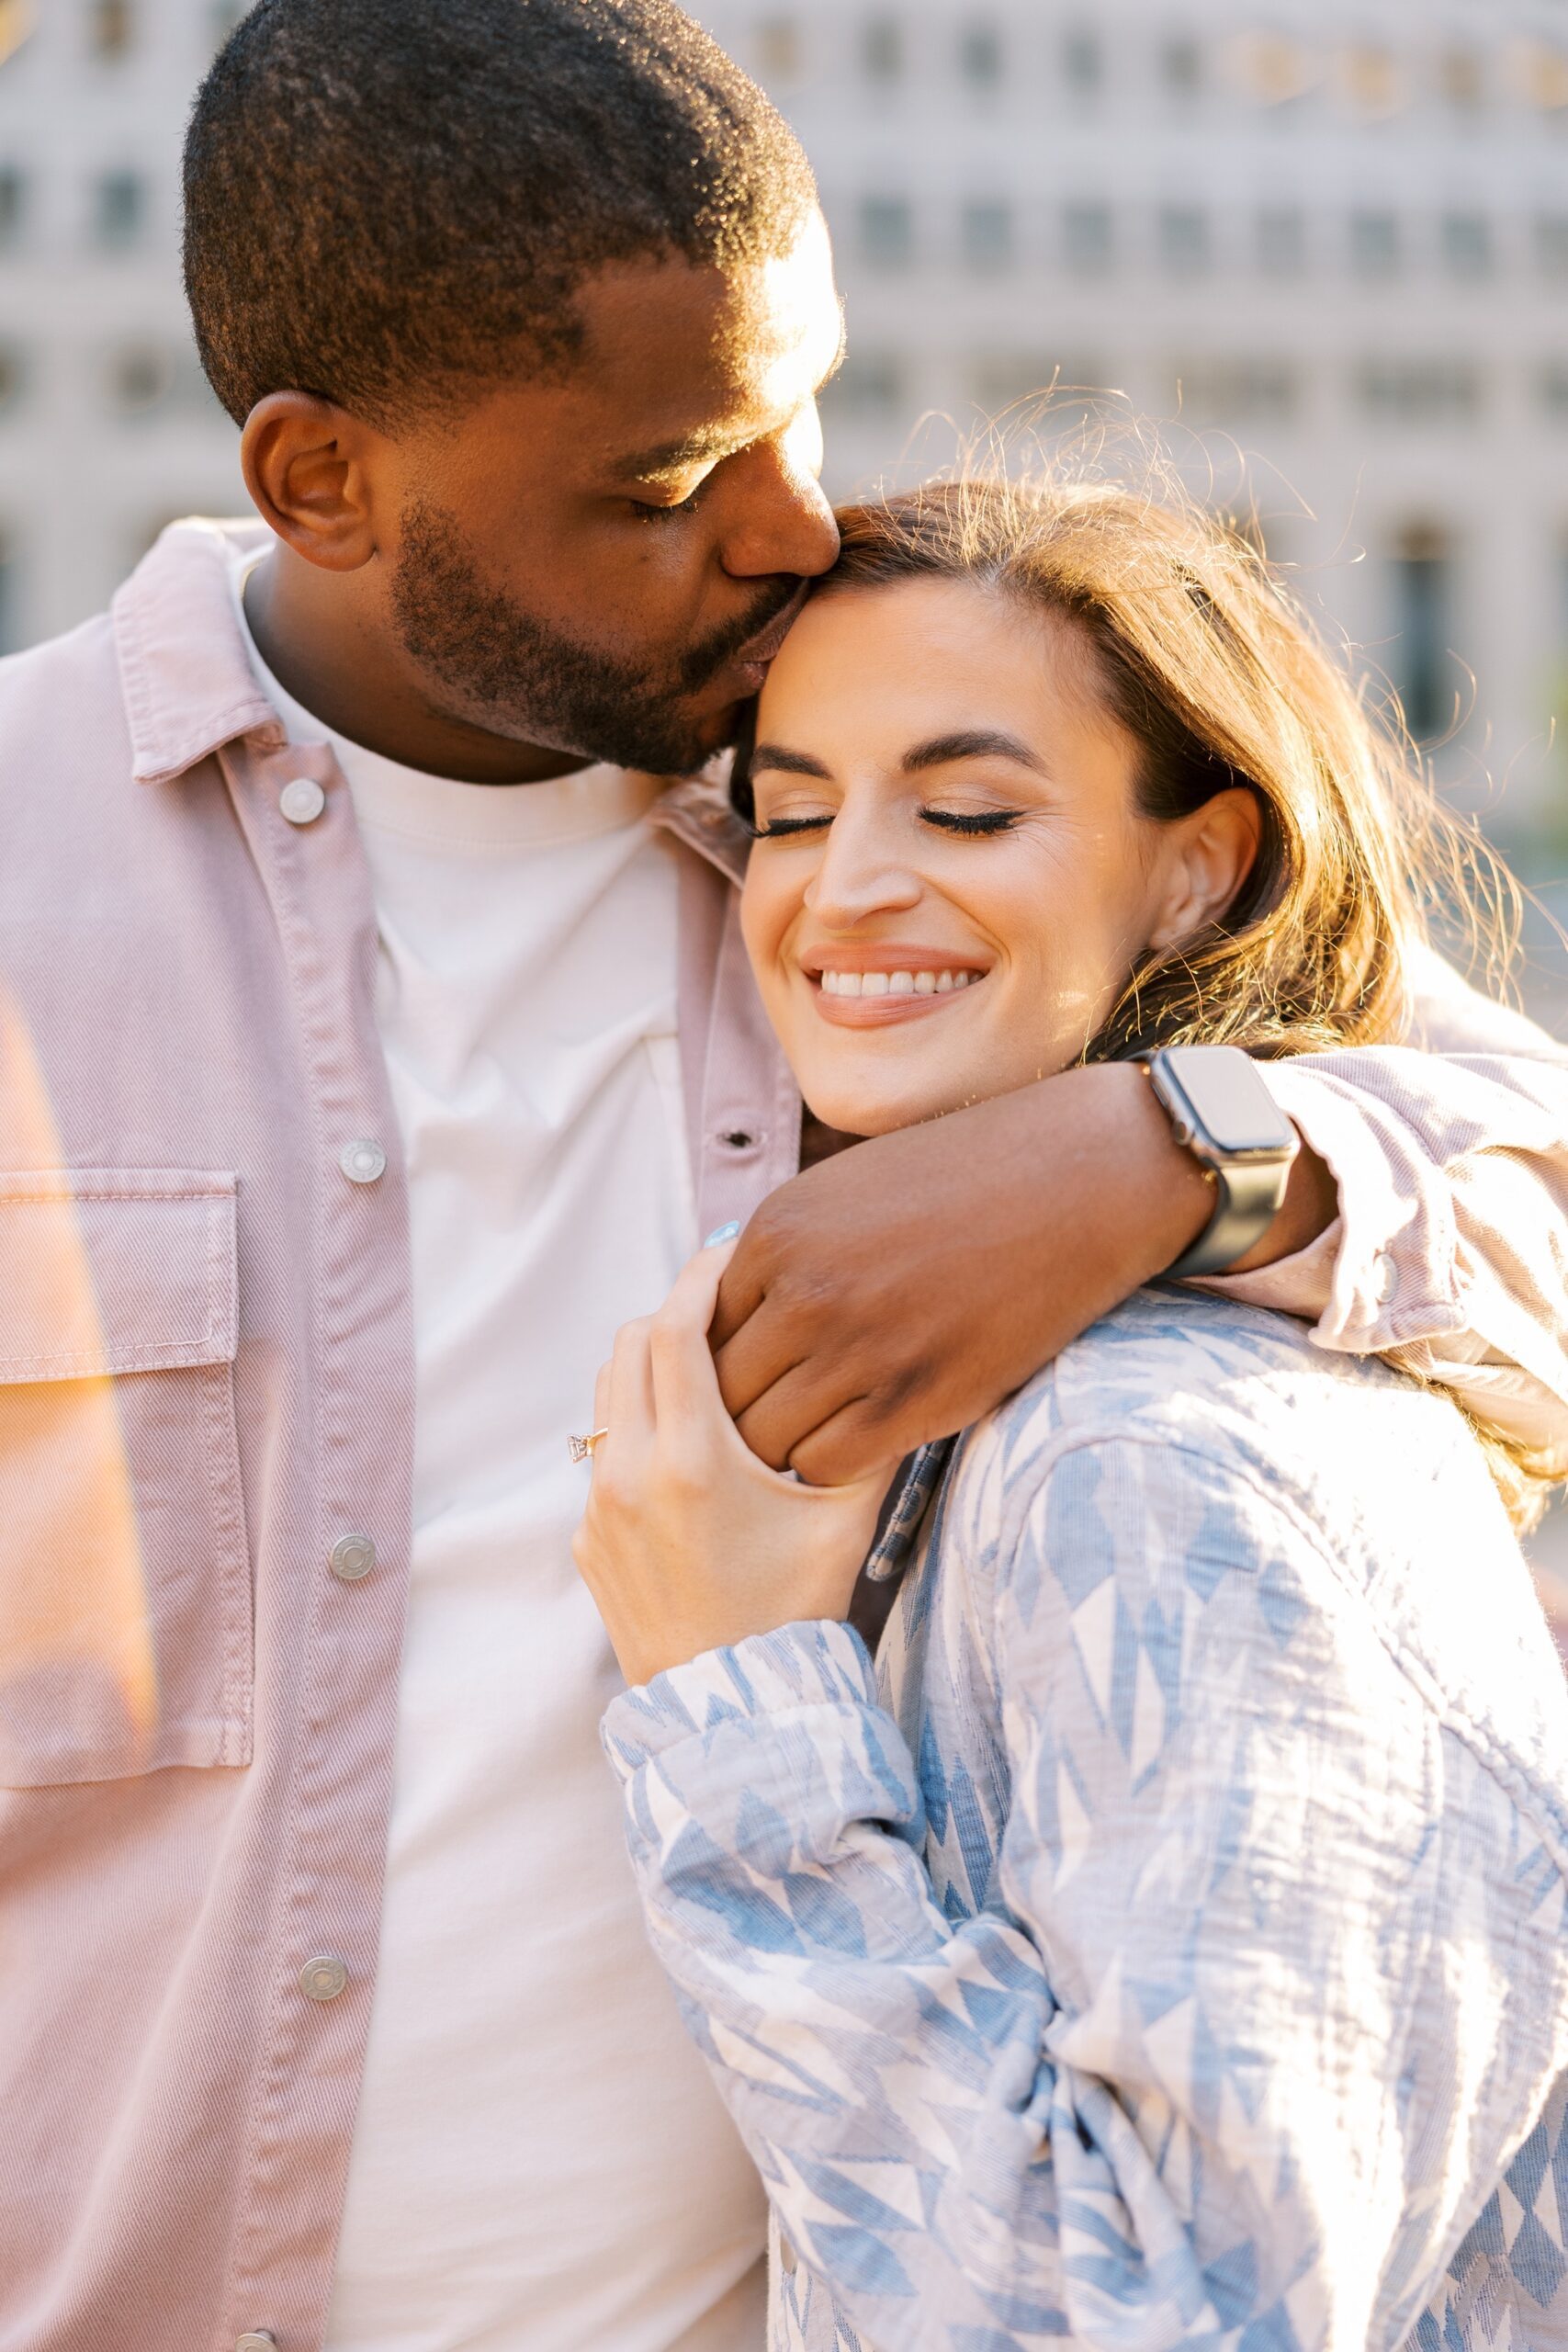 Man kisses woman on forehead during Chicago engagement pictures